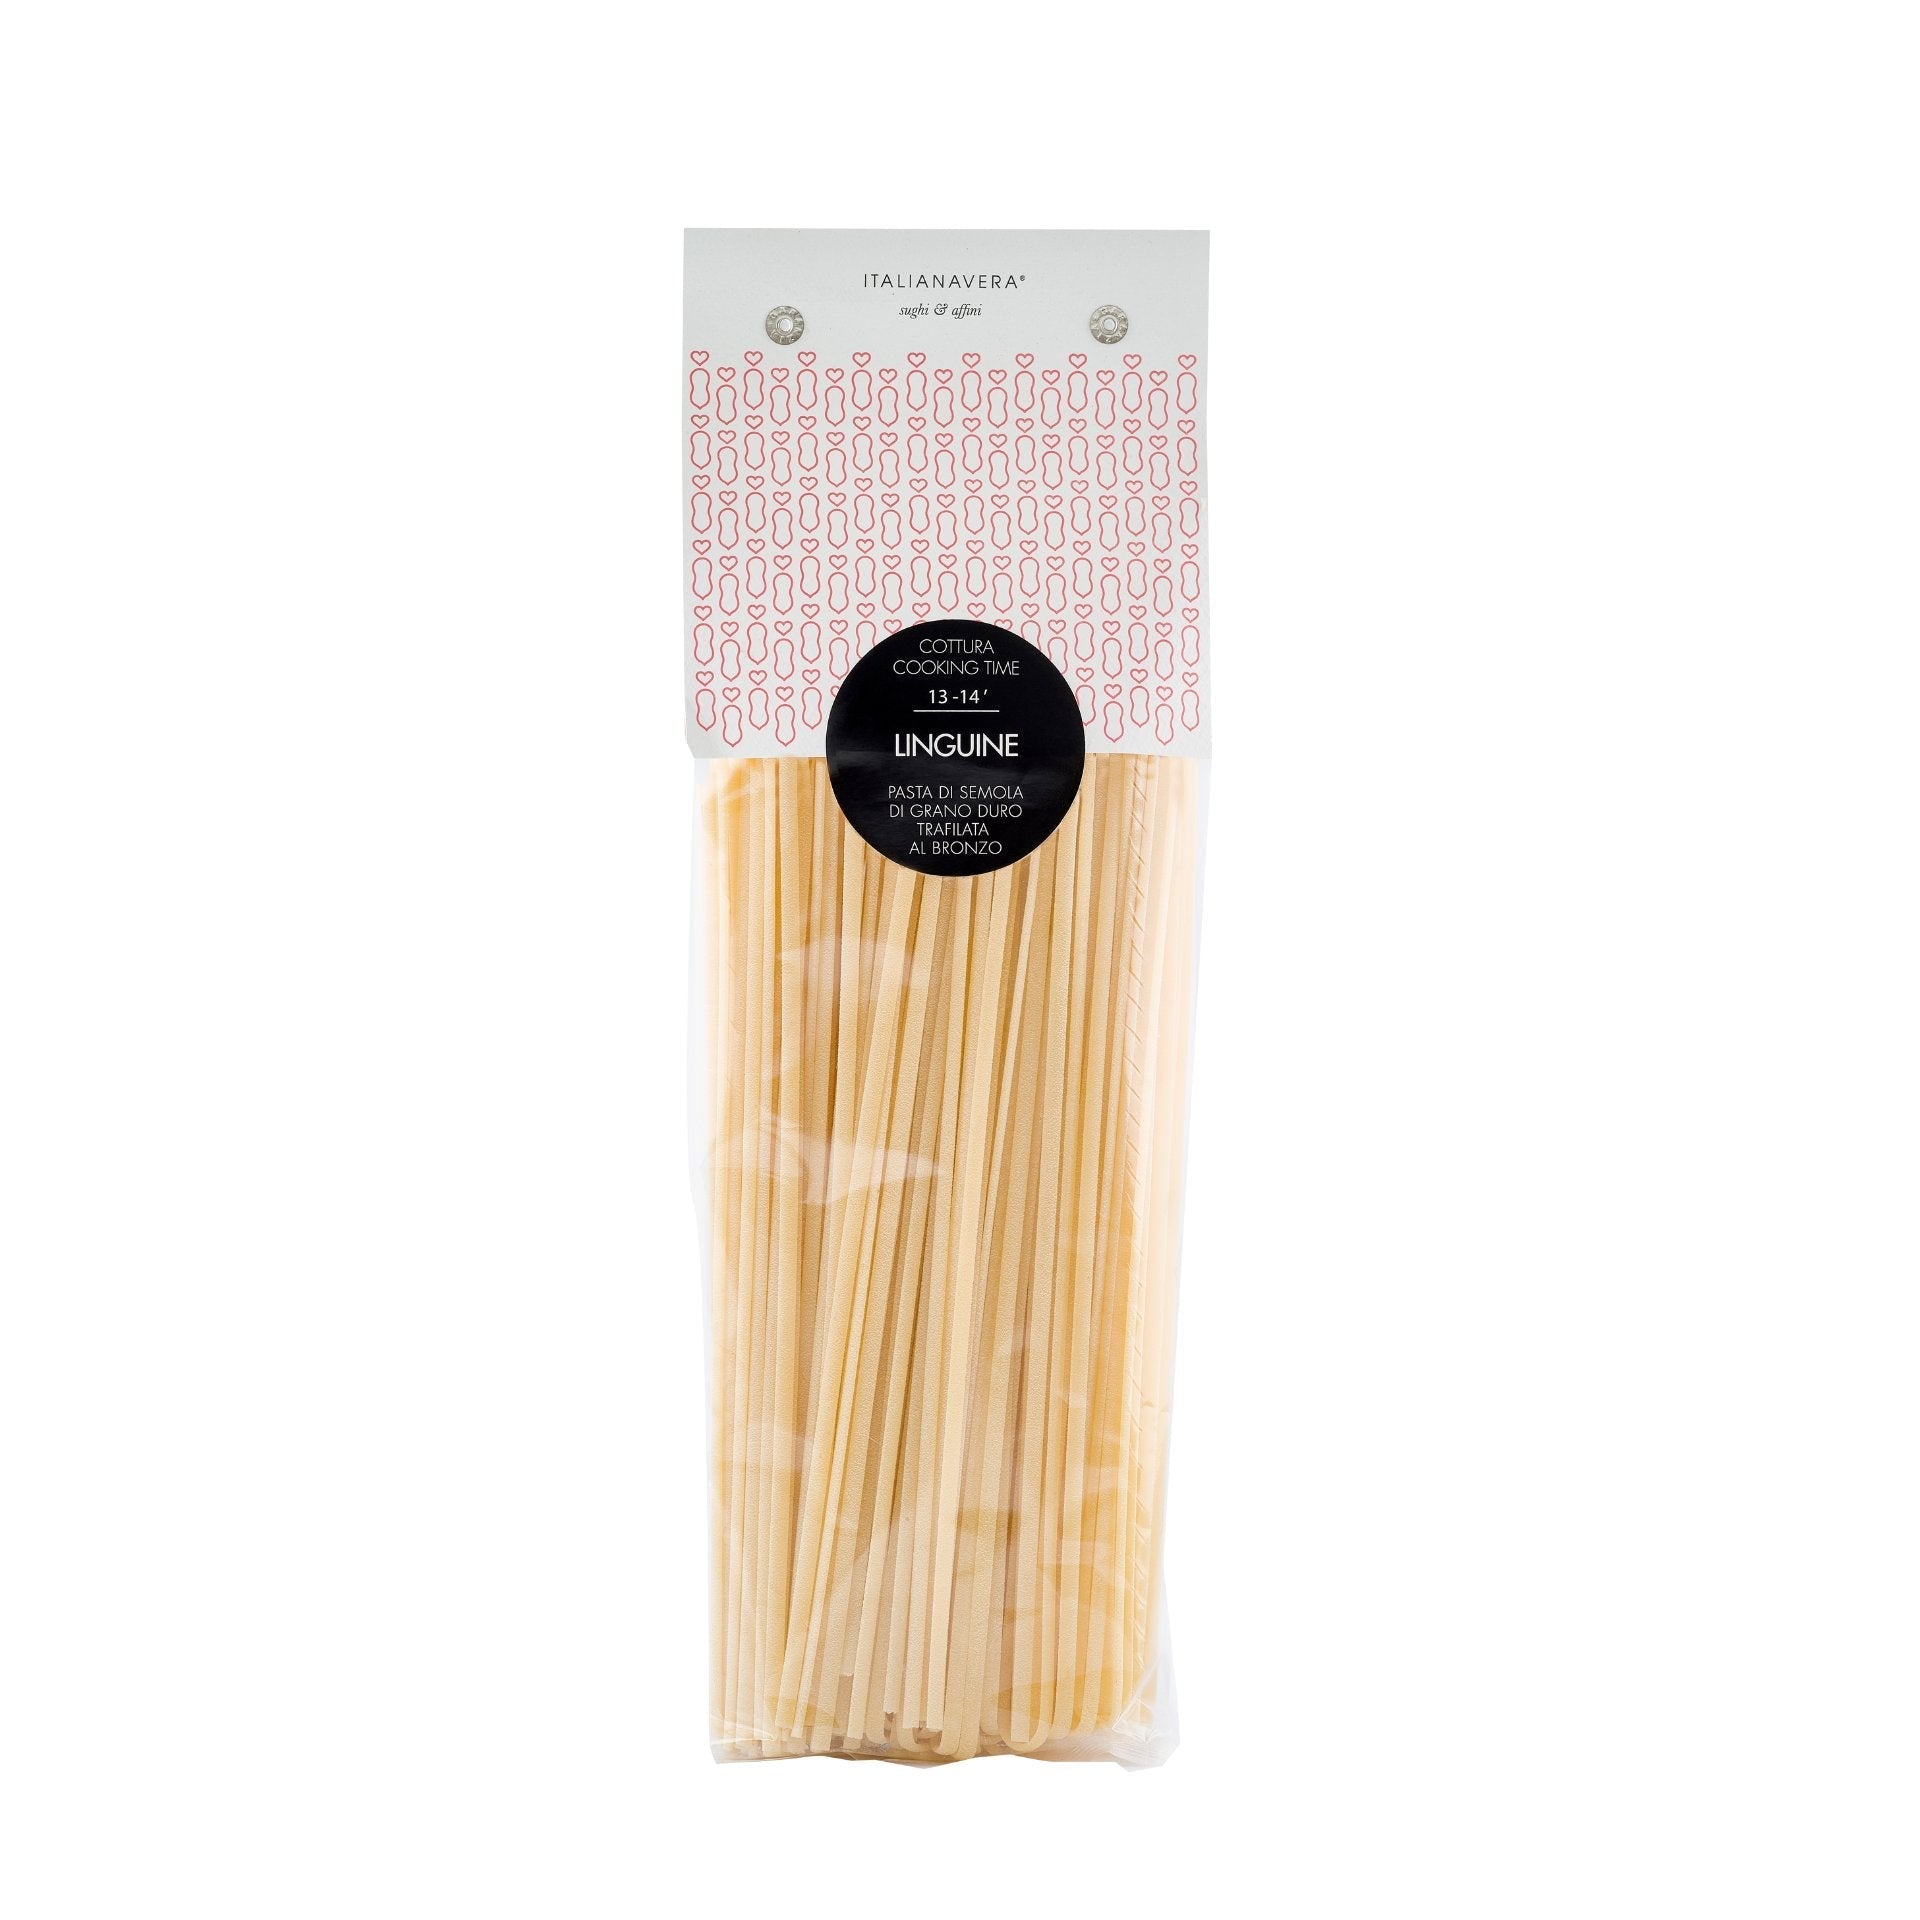 Italianavera Linguine 500g  | Imported and distributed in the UK by Just Gourmet Foods